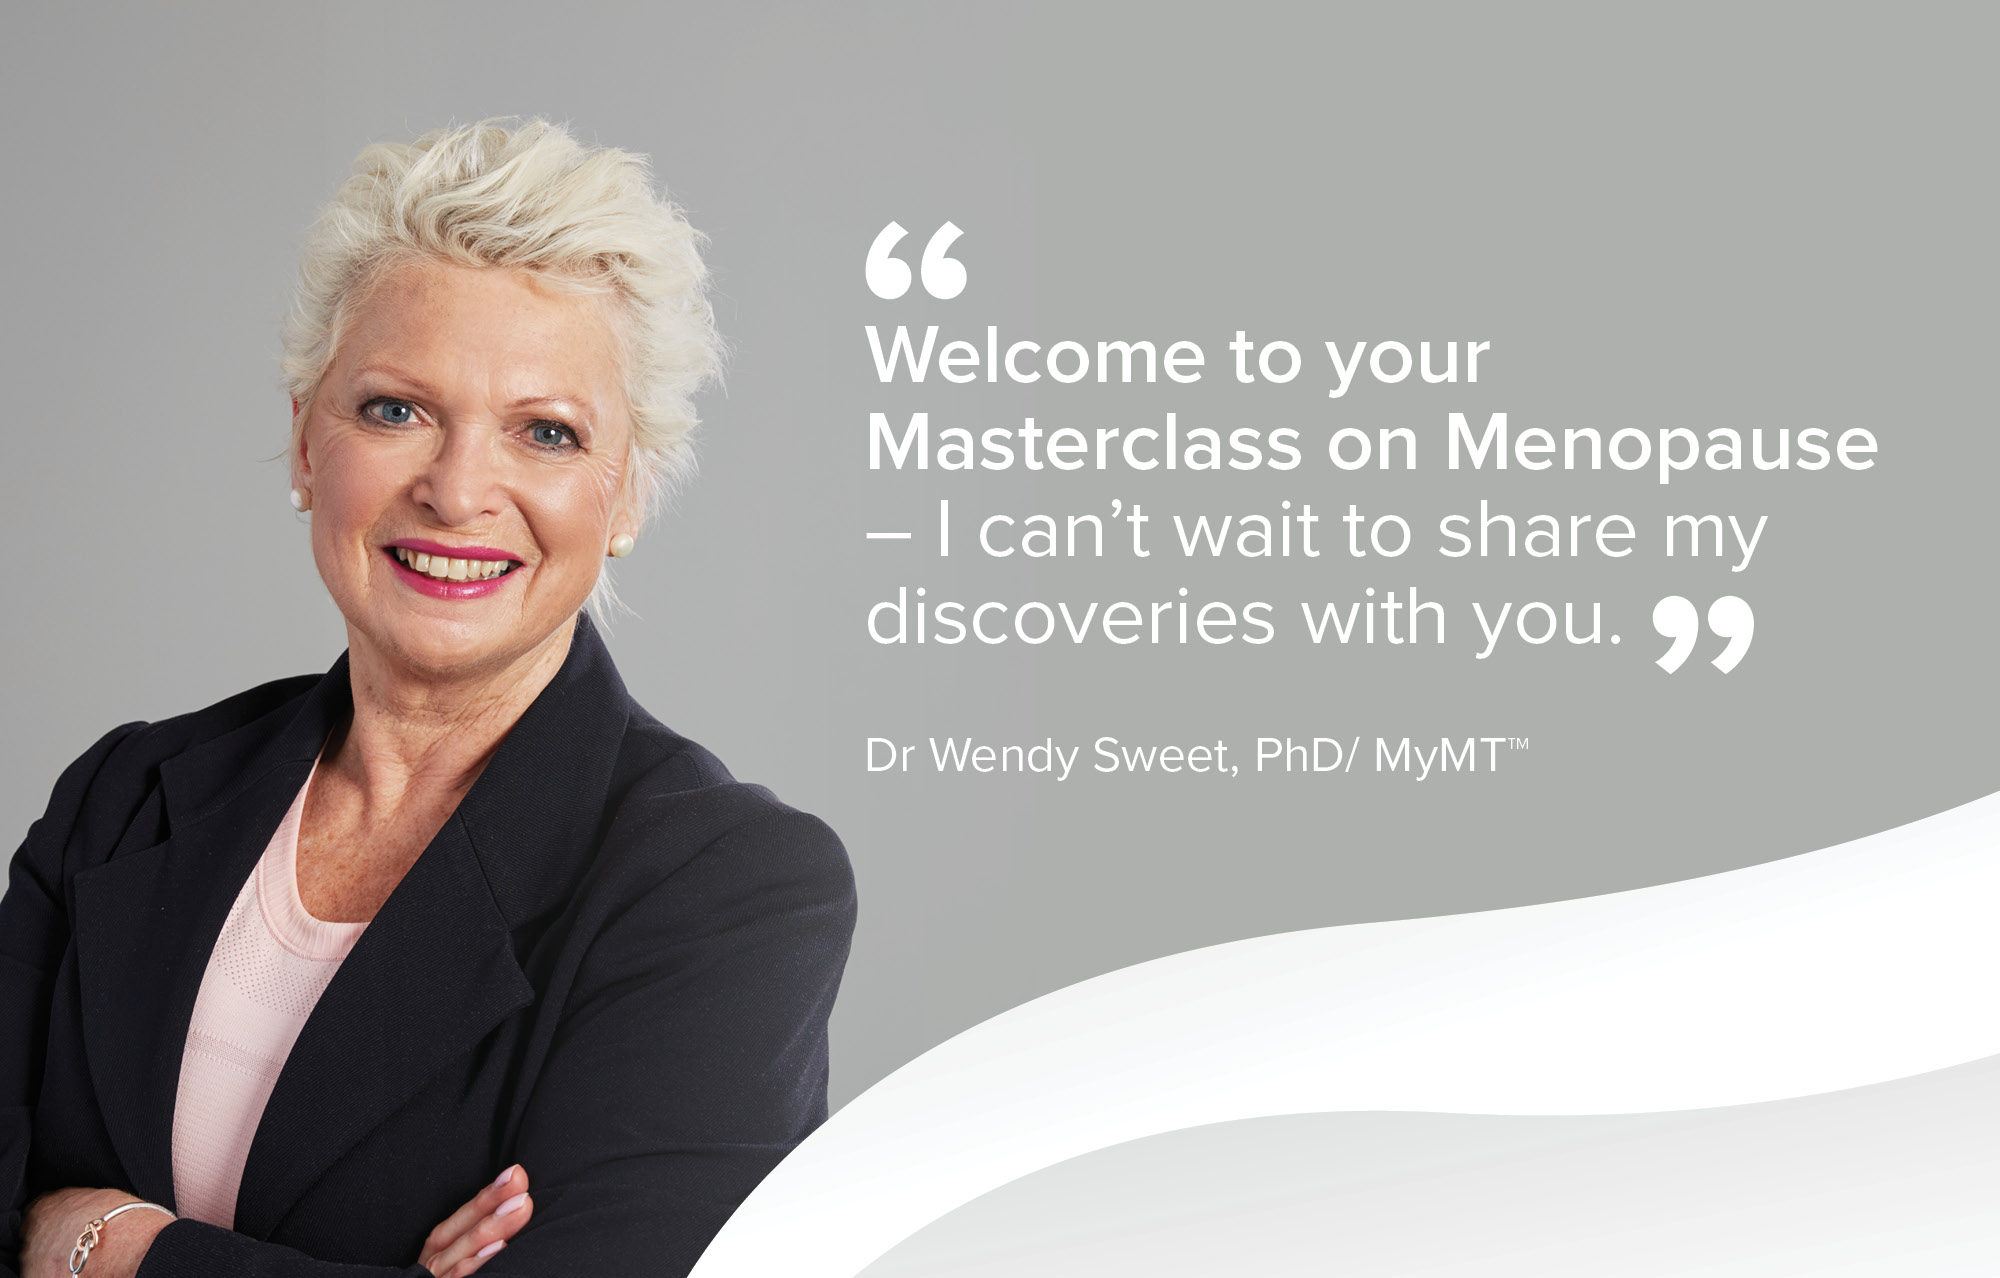 READING – Your Masterclass in Menopause